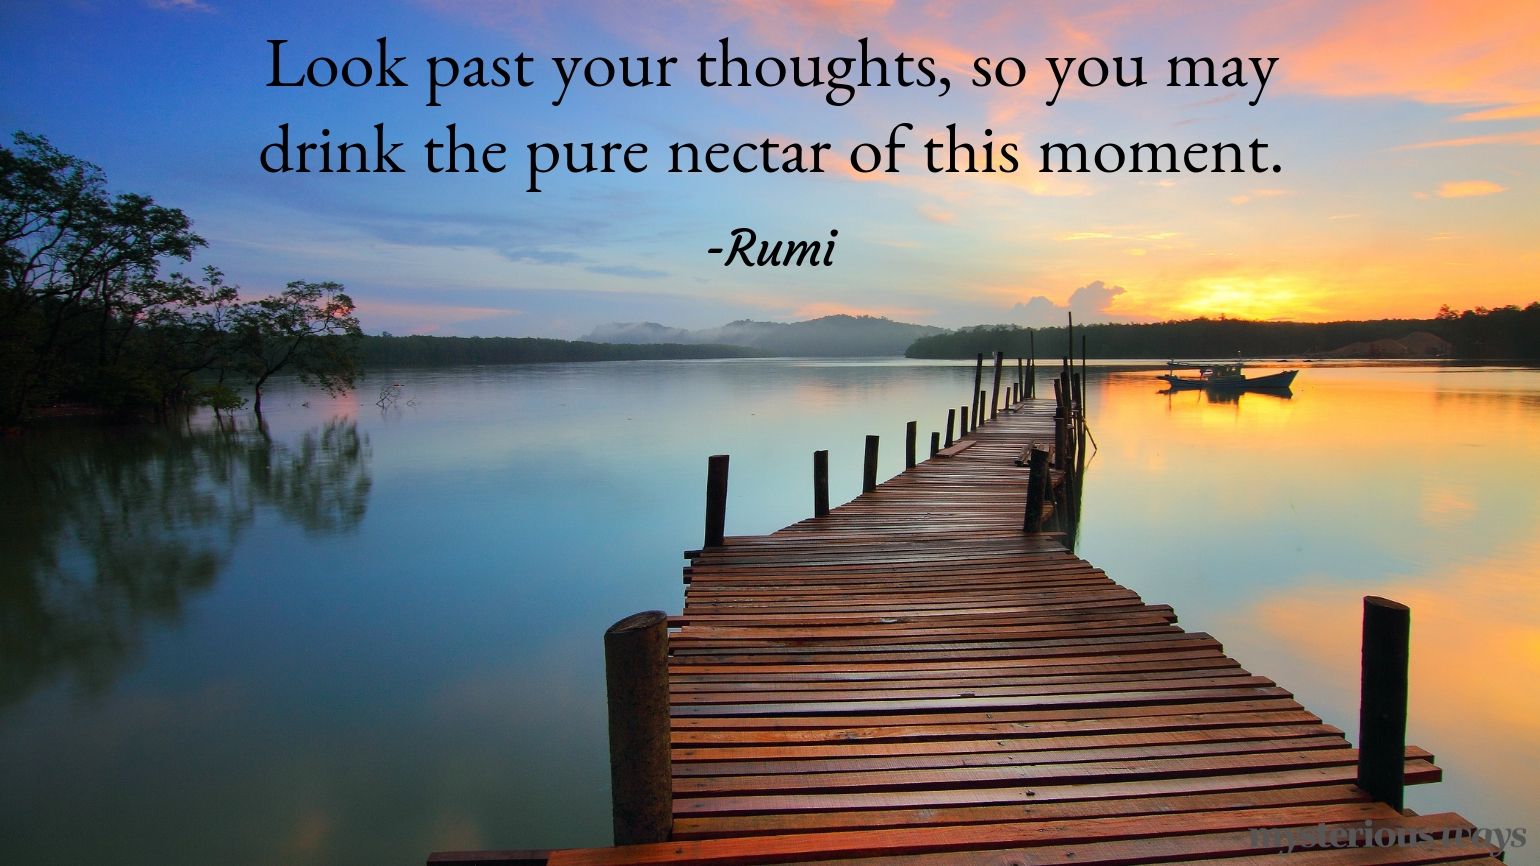 Look past your thoughts, so you may drink the pure nectar of this moment. —Rumi